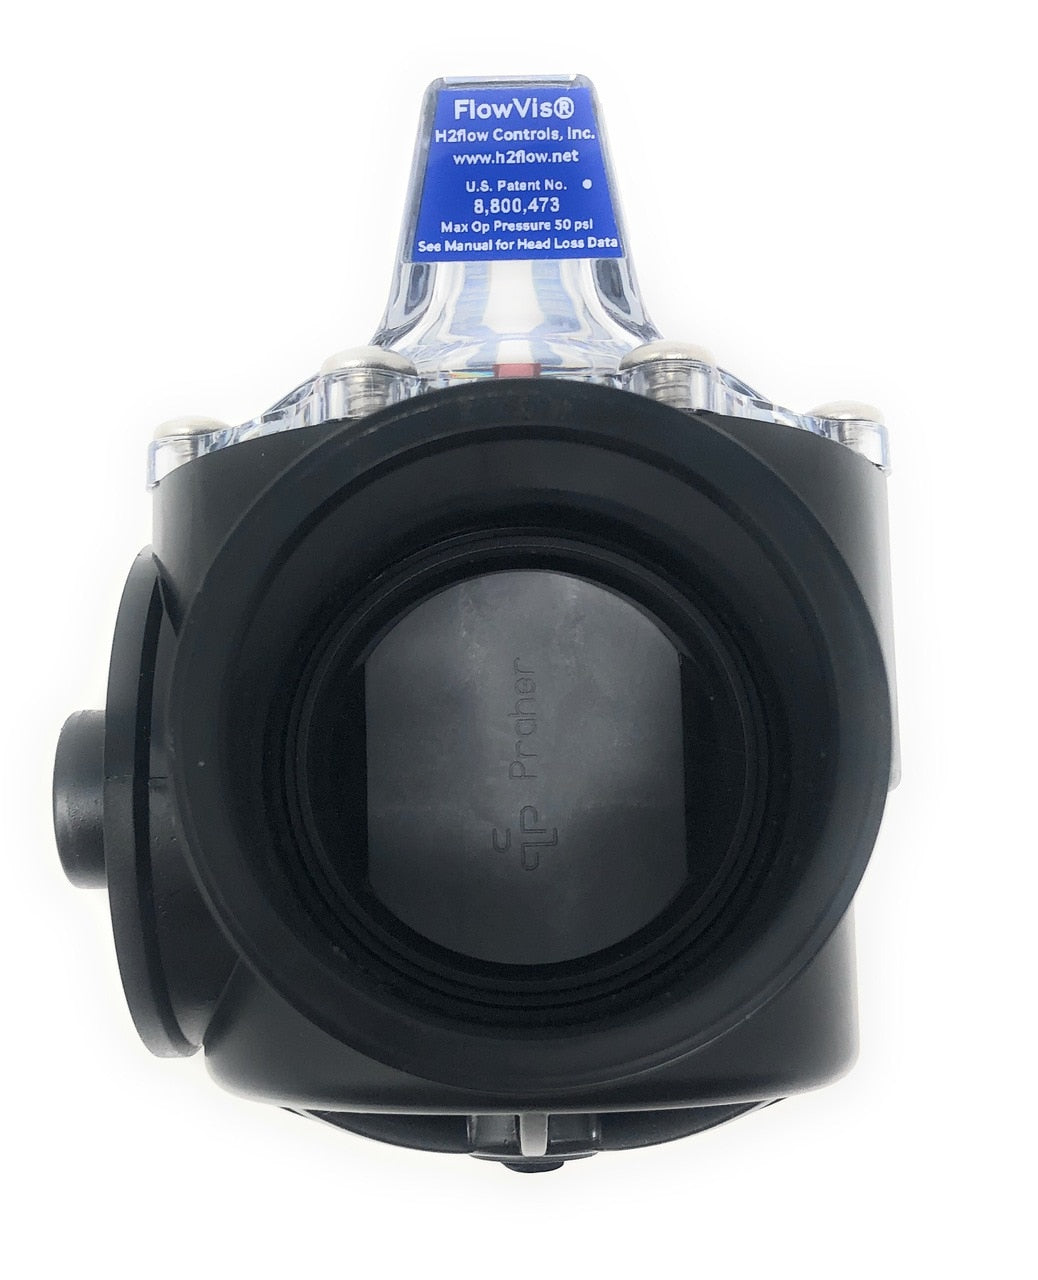 Top View - Black FlowVis GPM Flow Meter Valve for 2" & 2.5" Pipes - ePoolSupply